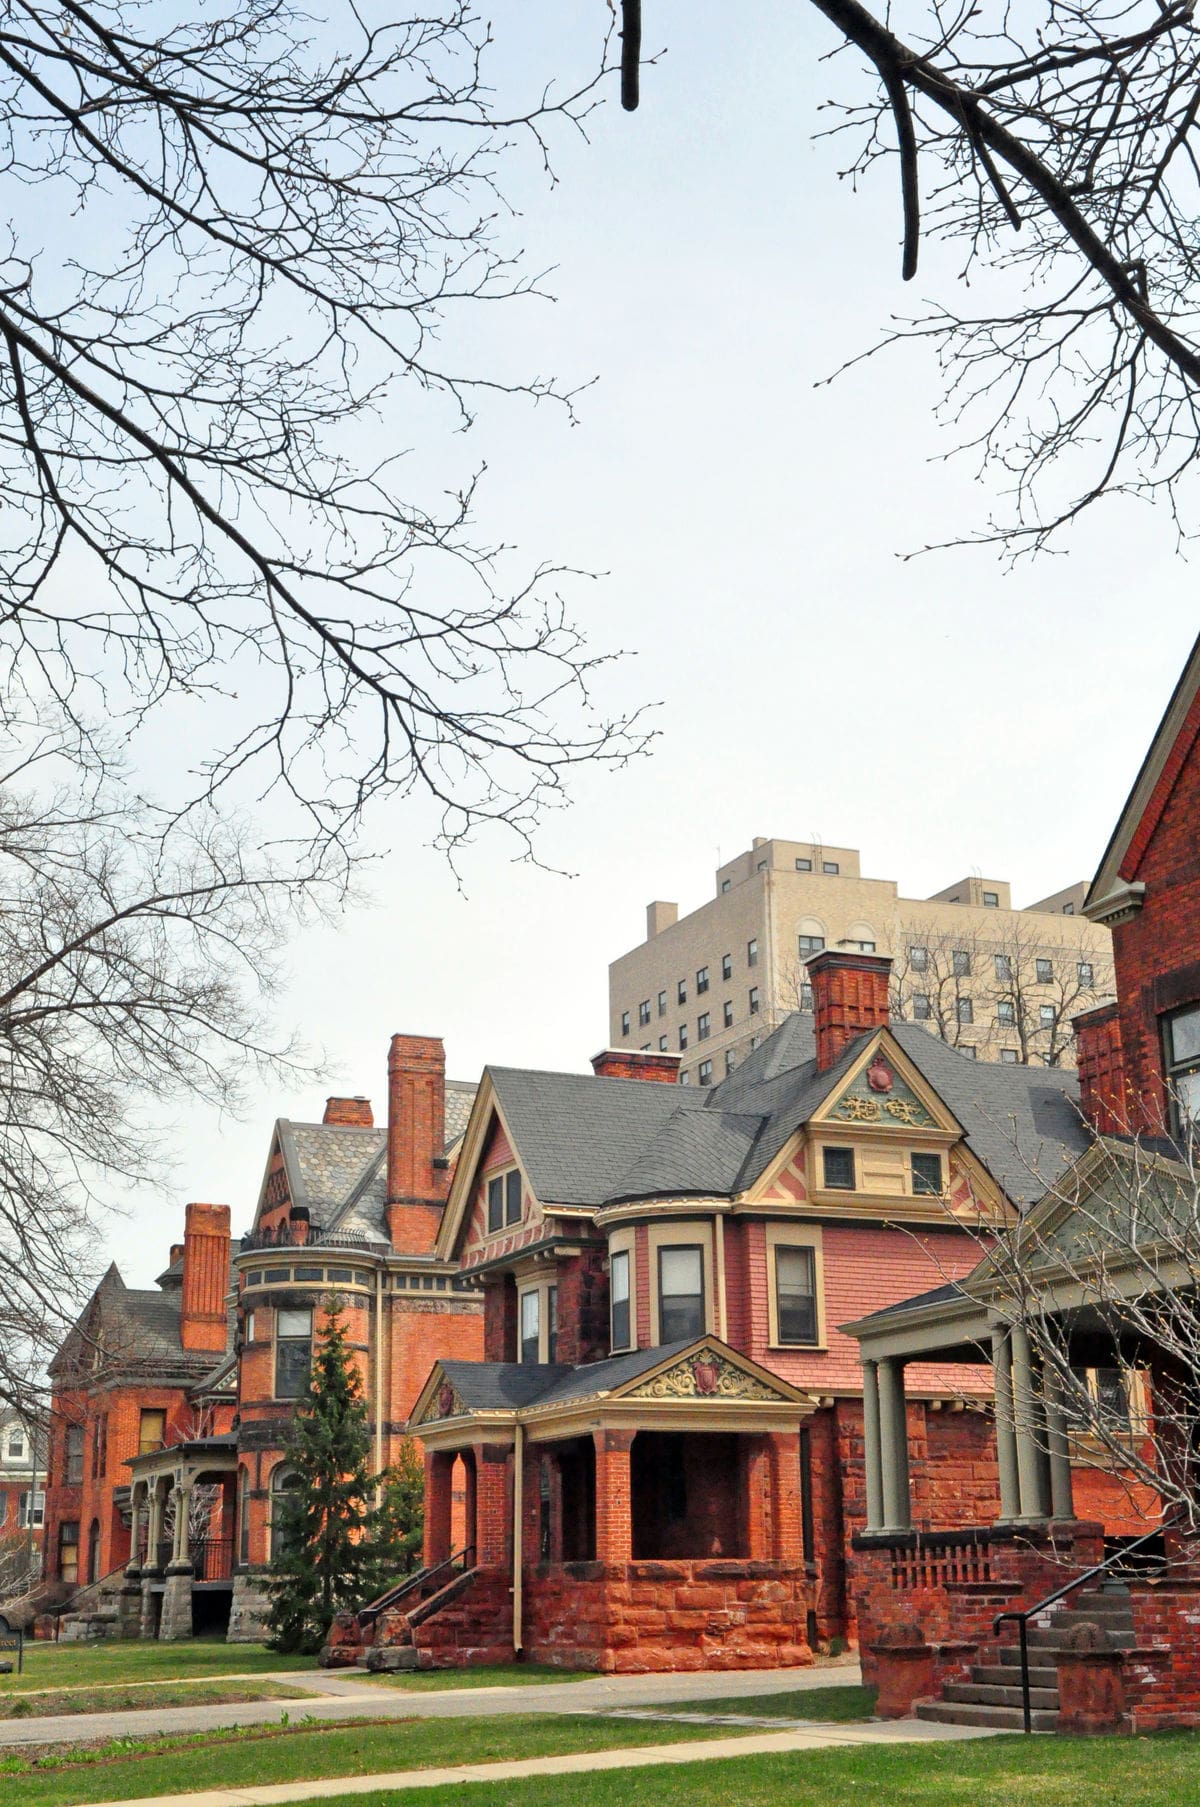 photo of the exterior of some historic red brick houses in midtown Detroit.